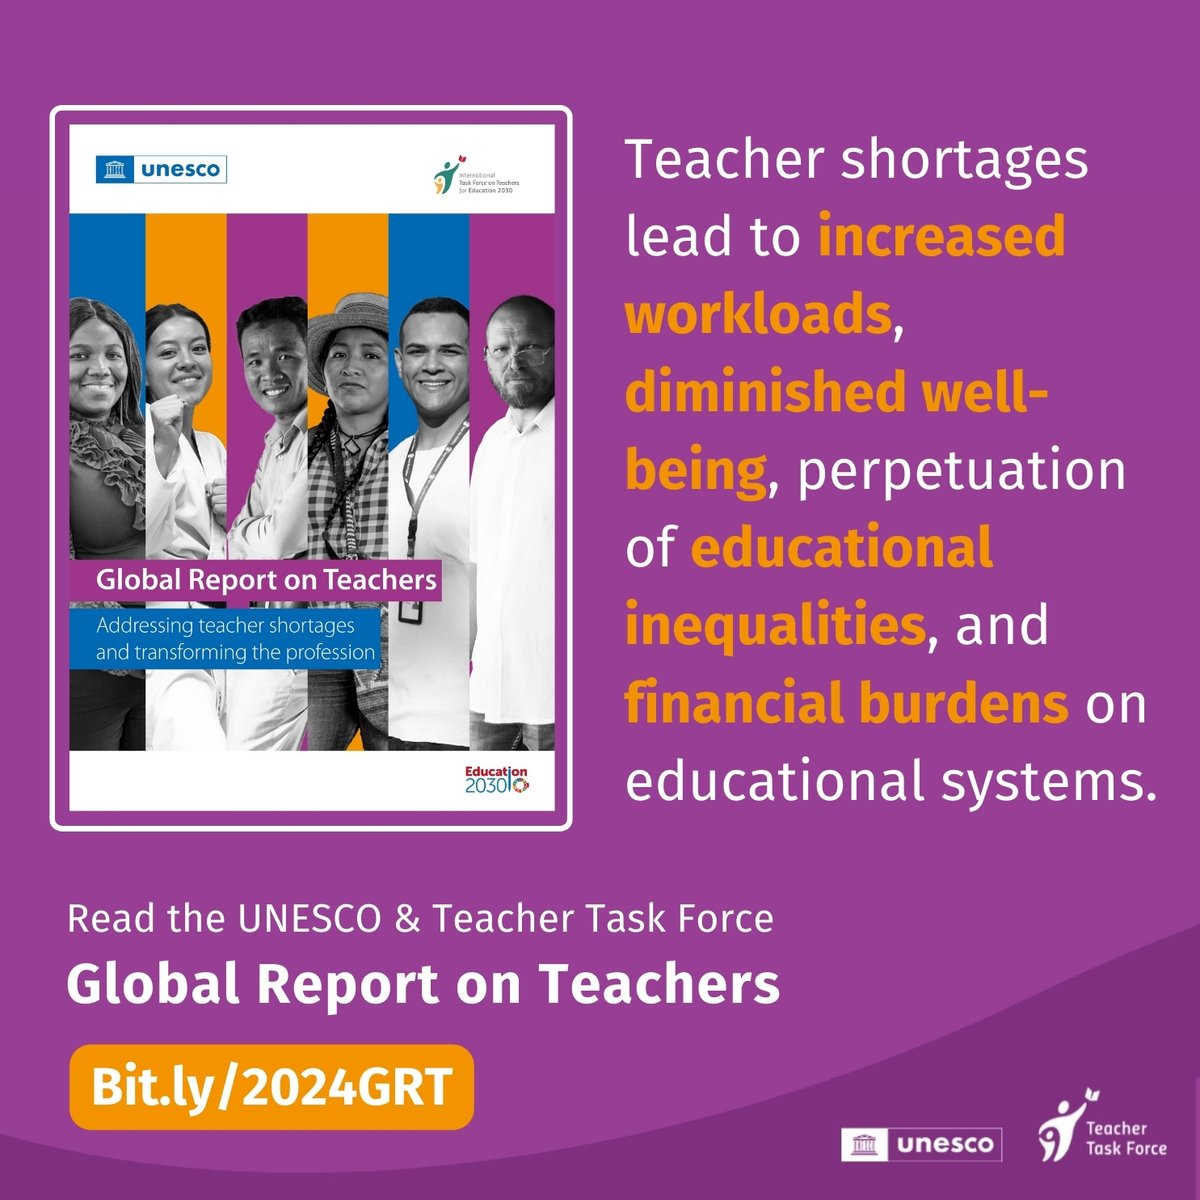 As outlined in the Global Report on Teachers, teacher shortages have far-reaching consequences: increased workloads, diminished well-being & perpetuation of educational inequalities. Let's work to mitigate these impacts. Read the report: bit.ly/2024GRT #InvestInTeachers